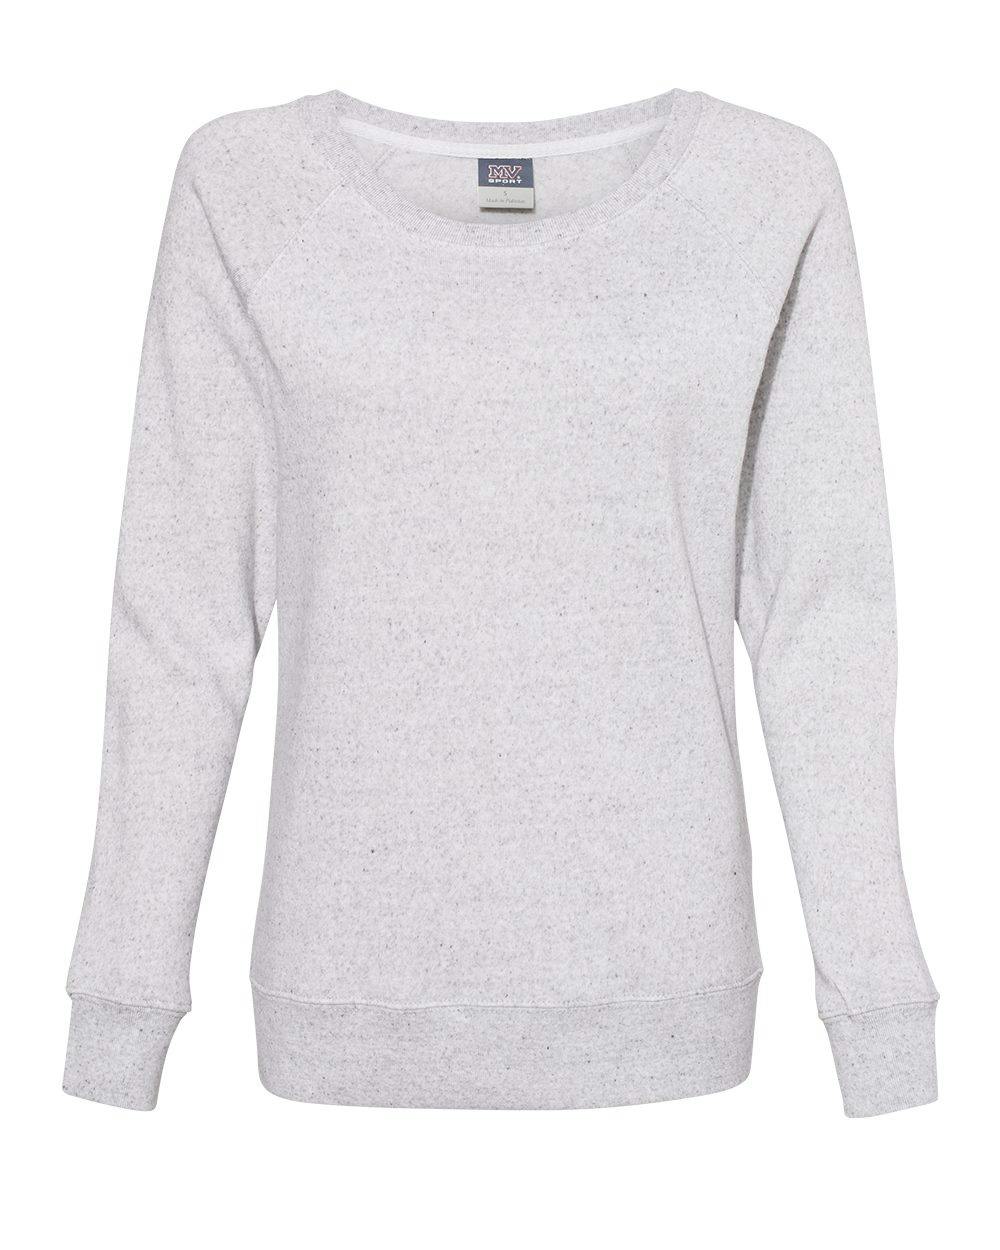 Image for Women’s Space-Dyed Sweatshirt - W20156